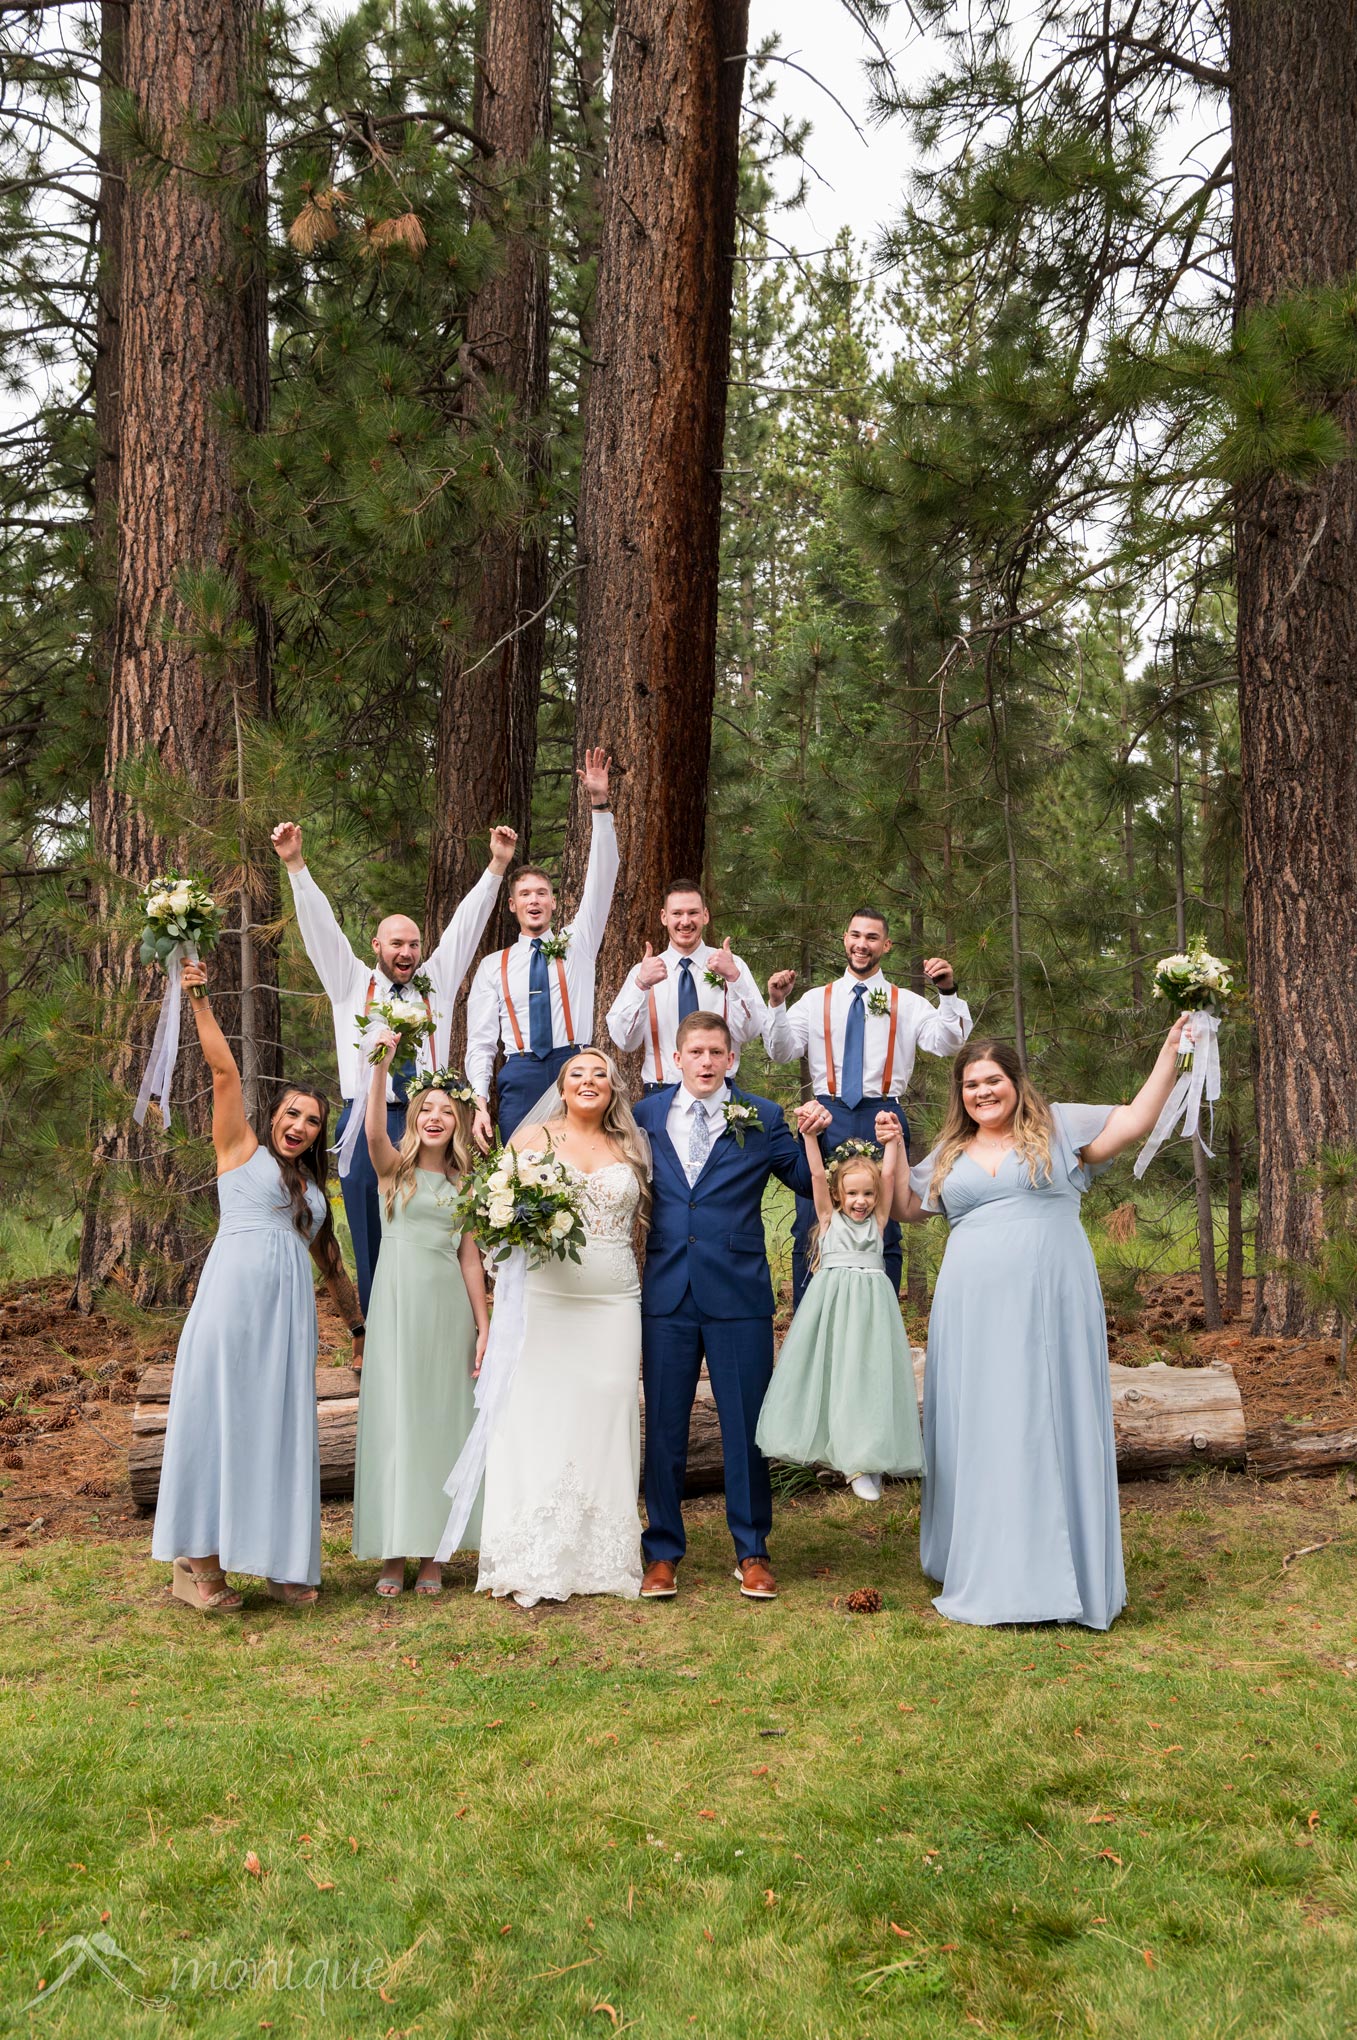 Valhalla wedding photography in South Lake Tahoe